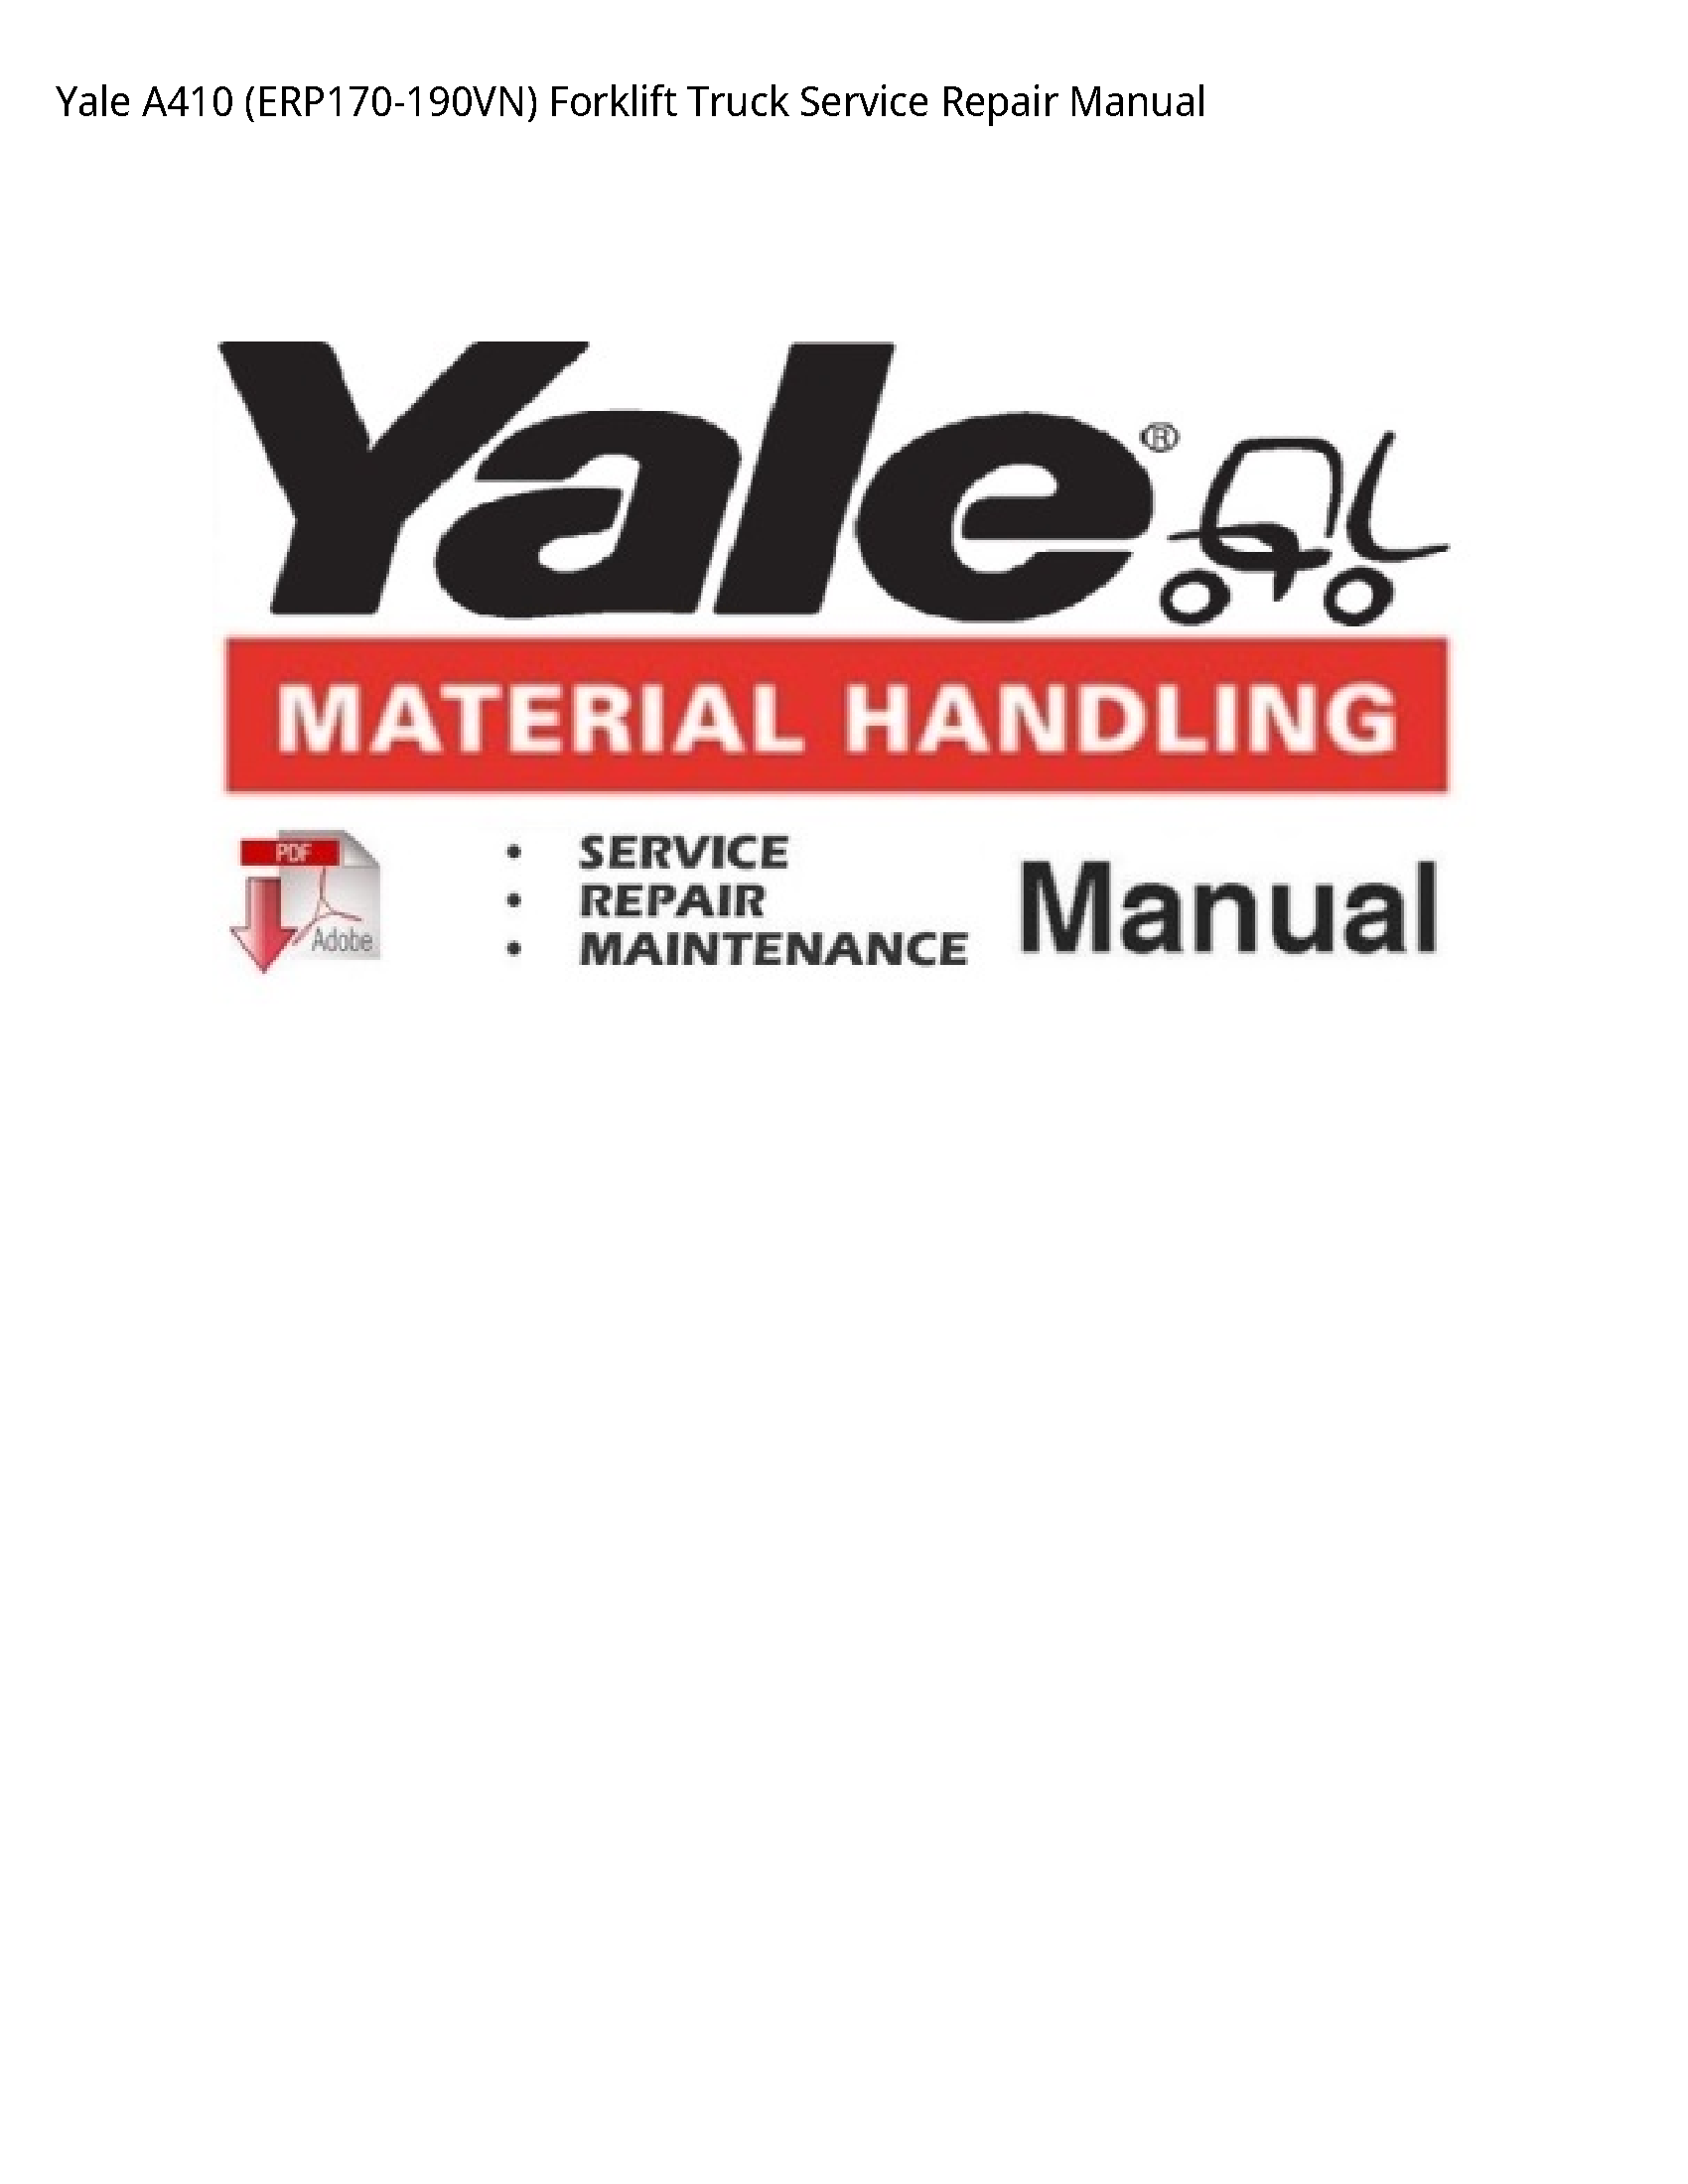 Yale A410 Forklift Truck manual